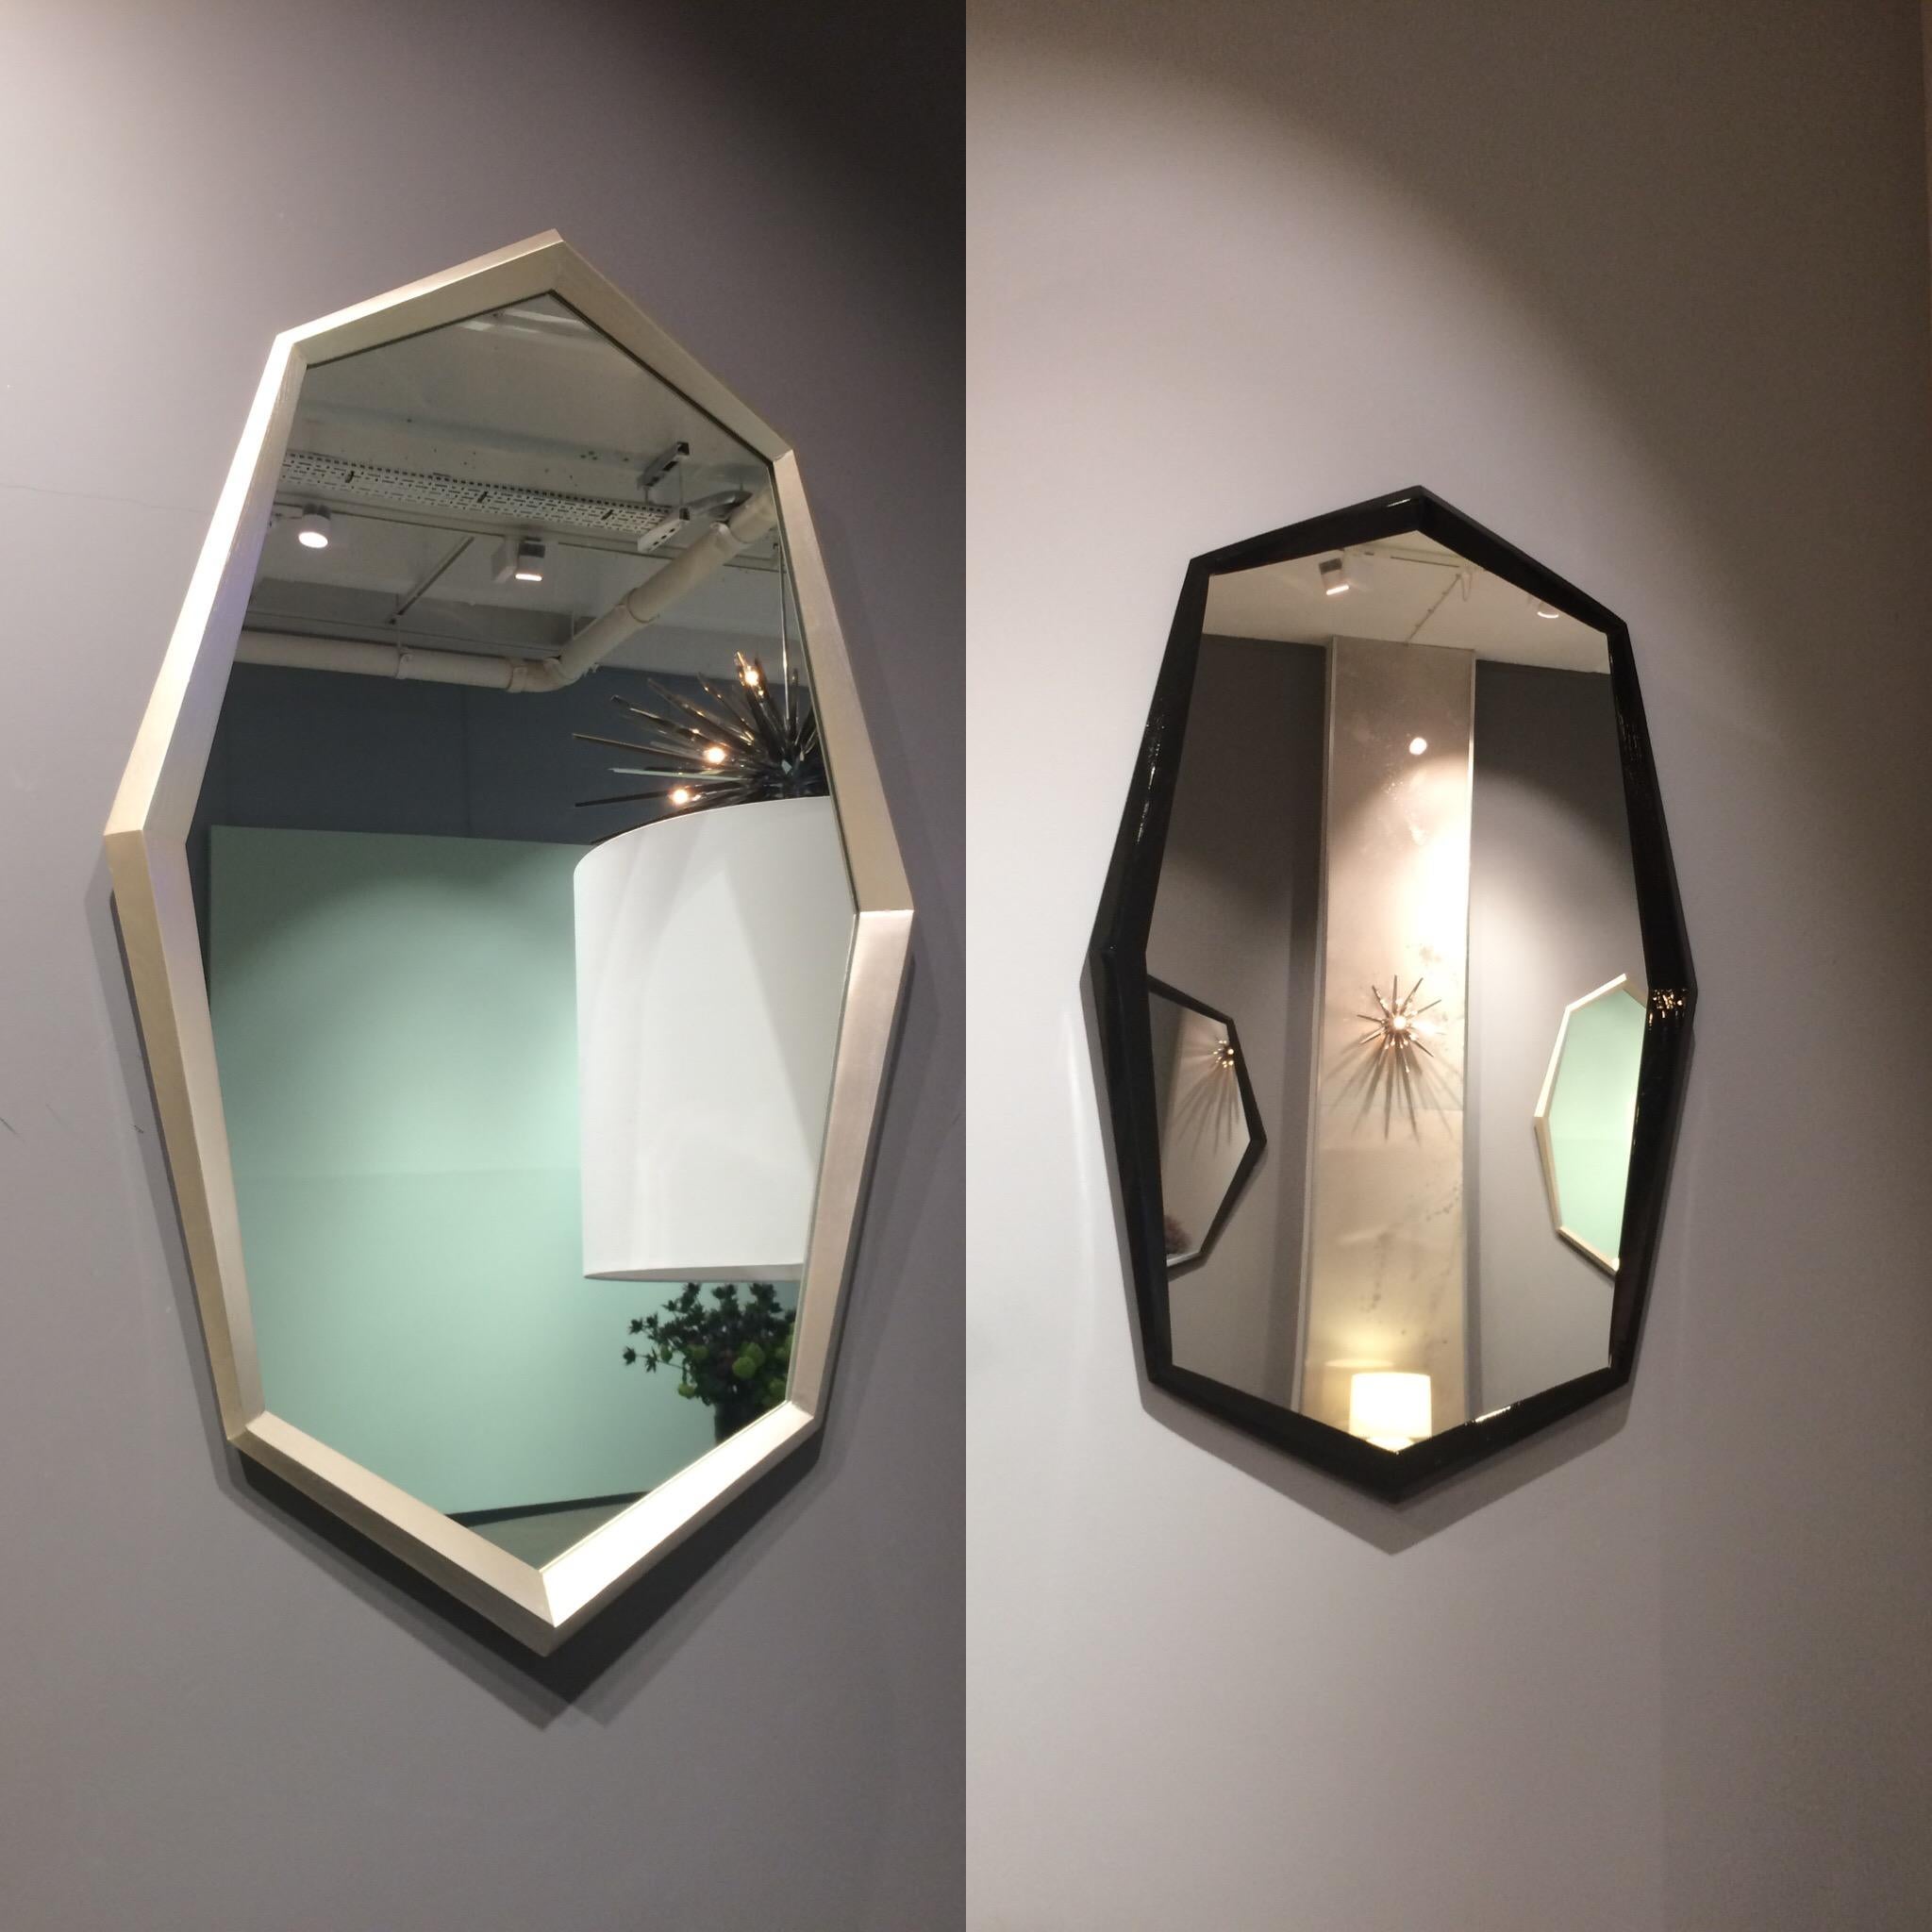 Okulus oval mirror from Sparkx collection by Jean- Louis Deniot
Dimensions: Width 78cm; Height 129cm; Depth 6cm
Materials: ashwood
Custom finish.